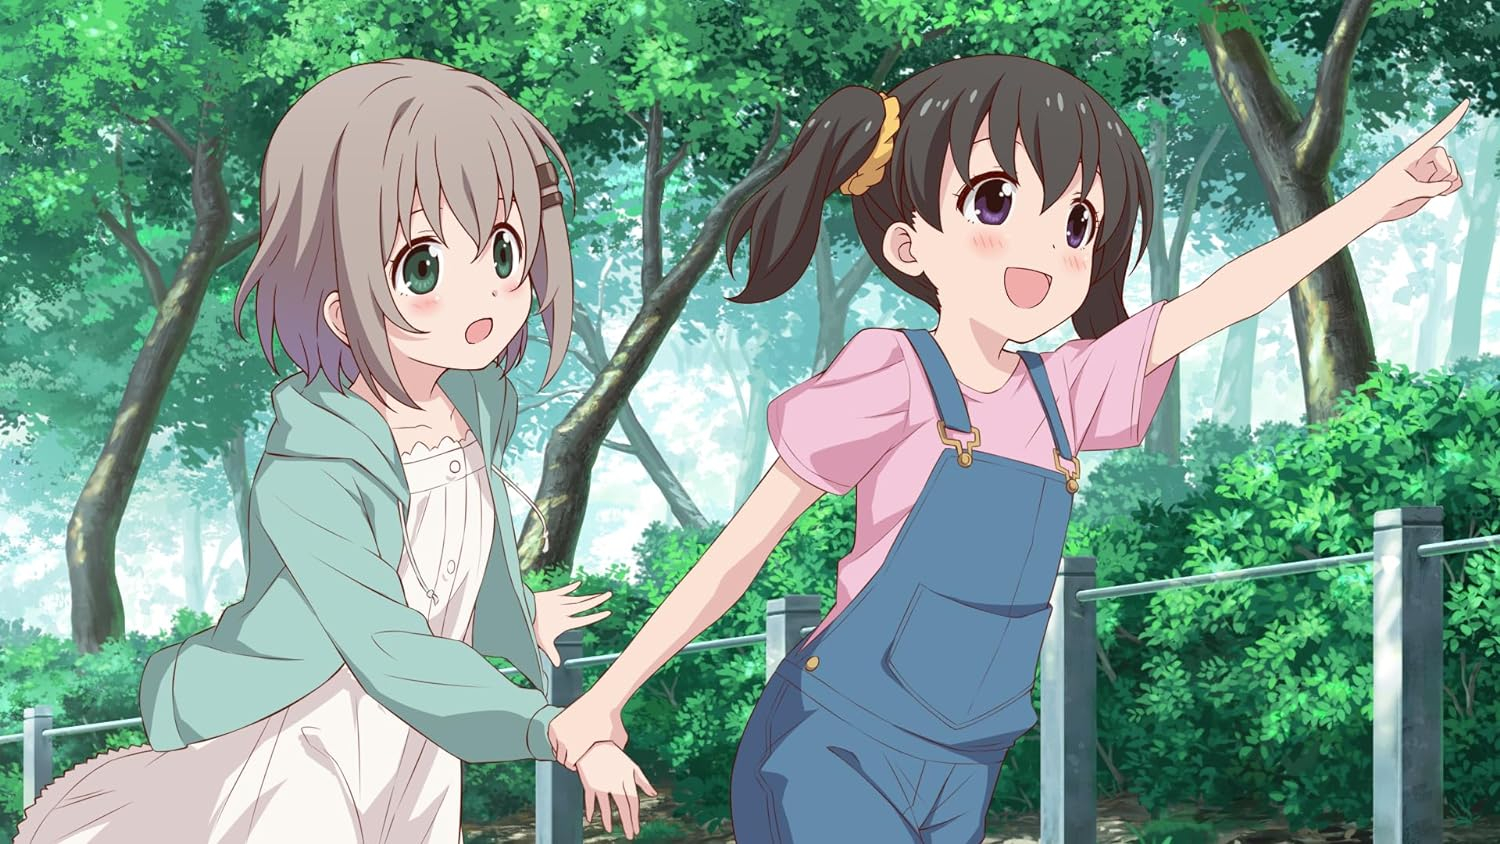 Yama No Susume - Encouragement of Climb - This is my place.